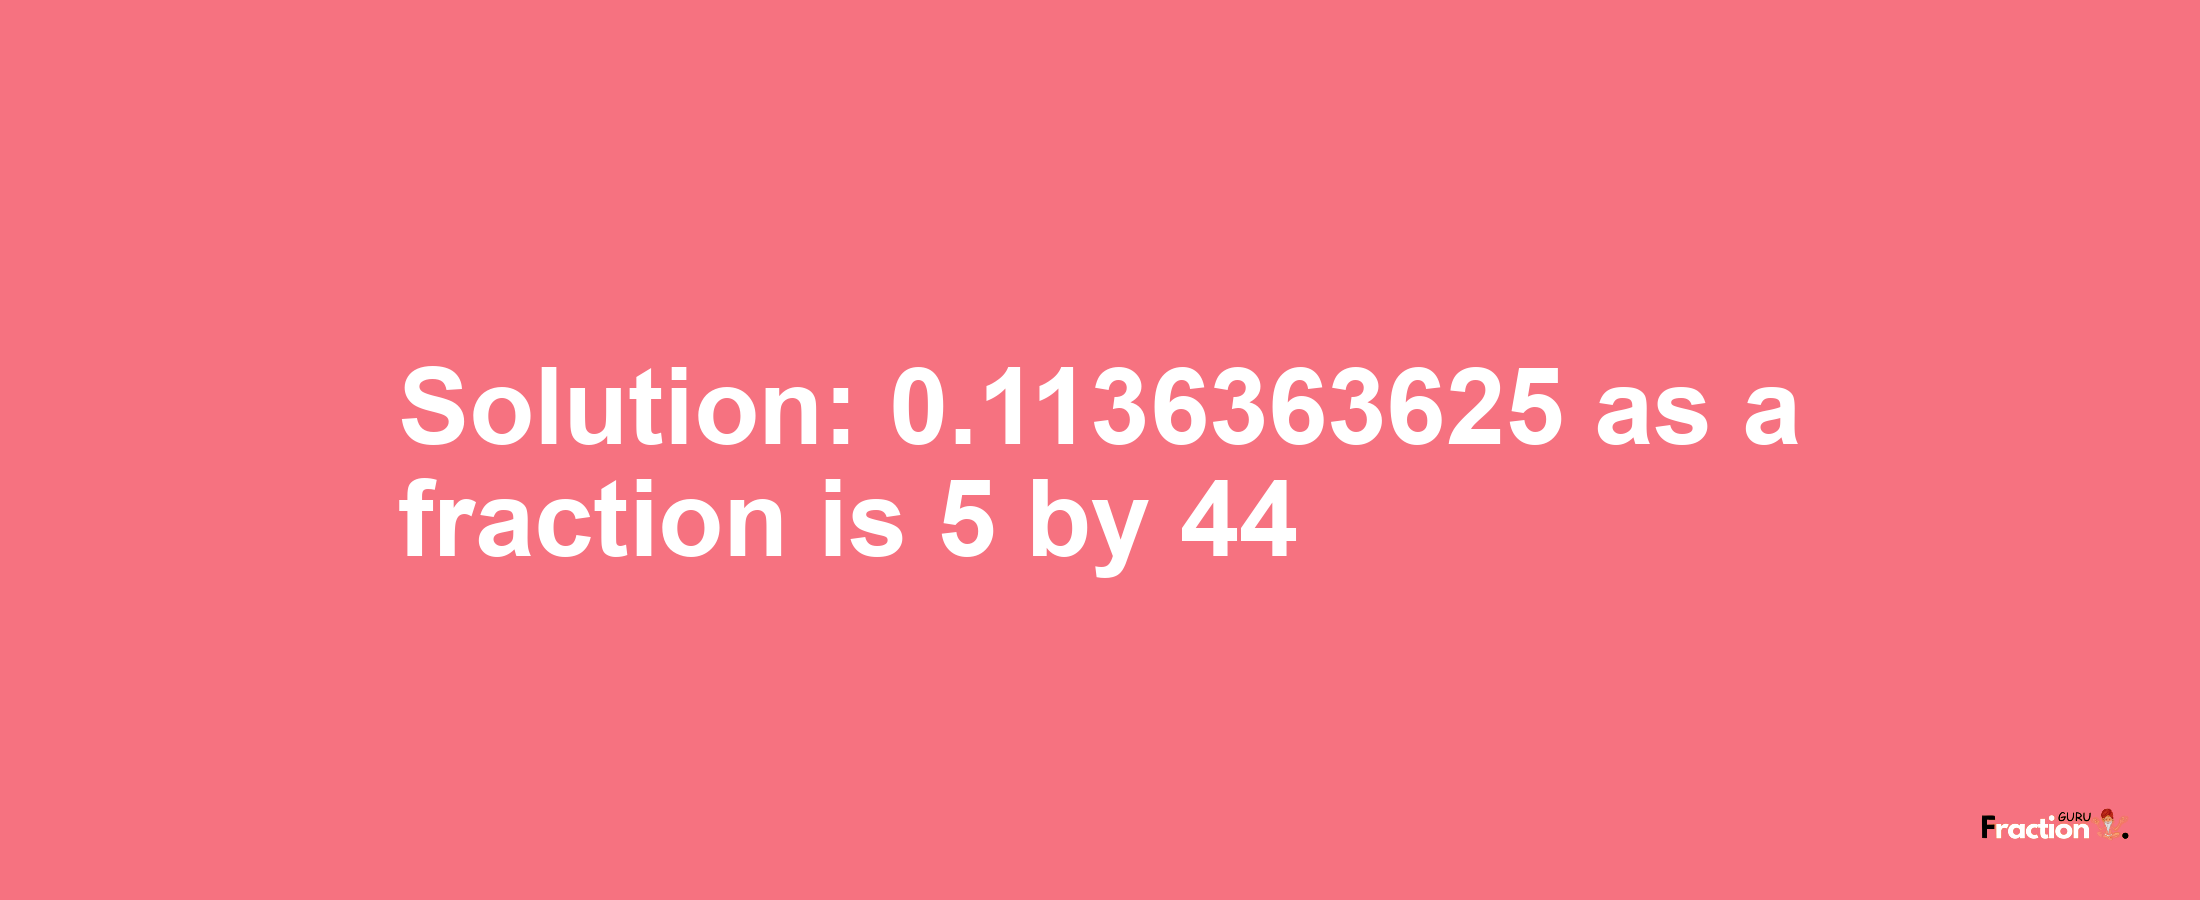 Solution:0.1136363625 as a fraction is 5/44